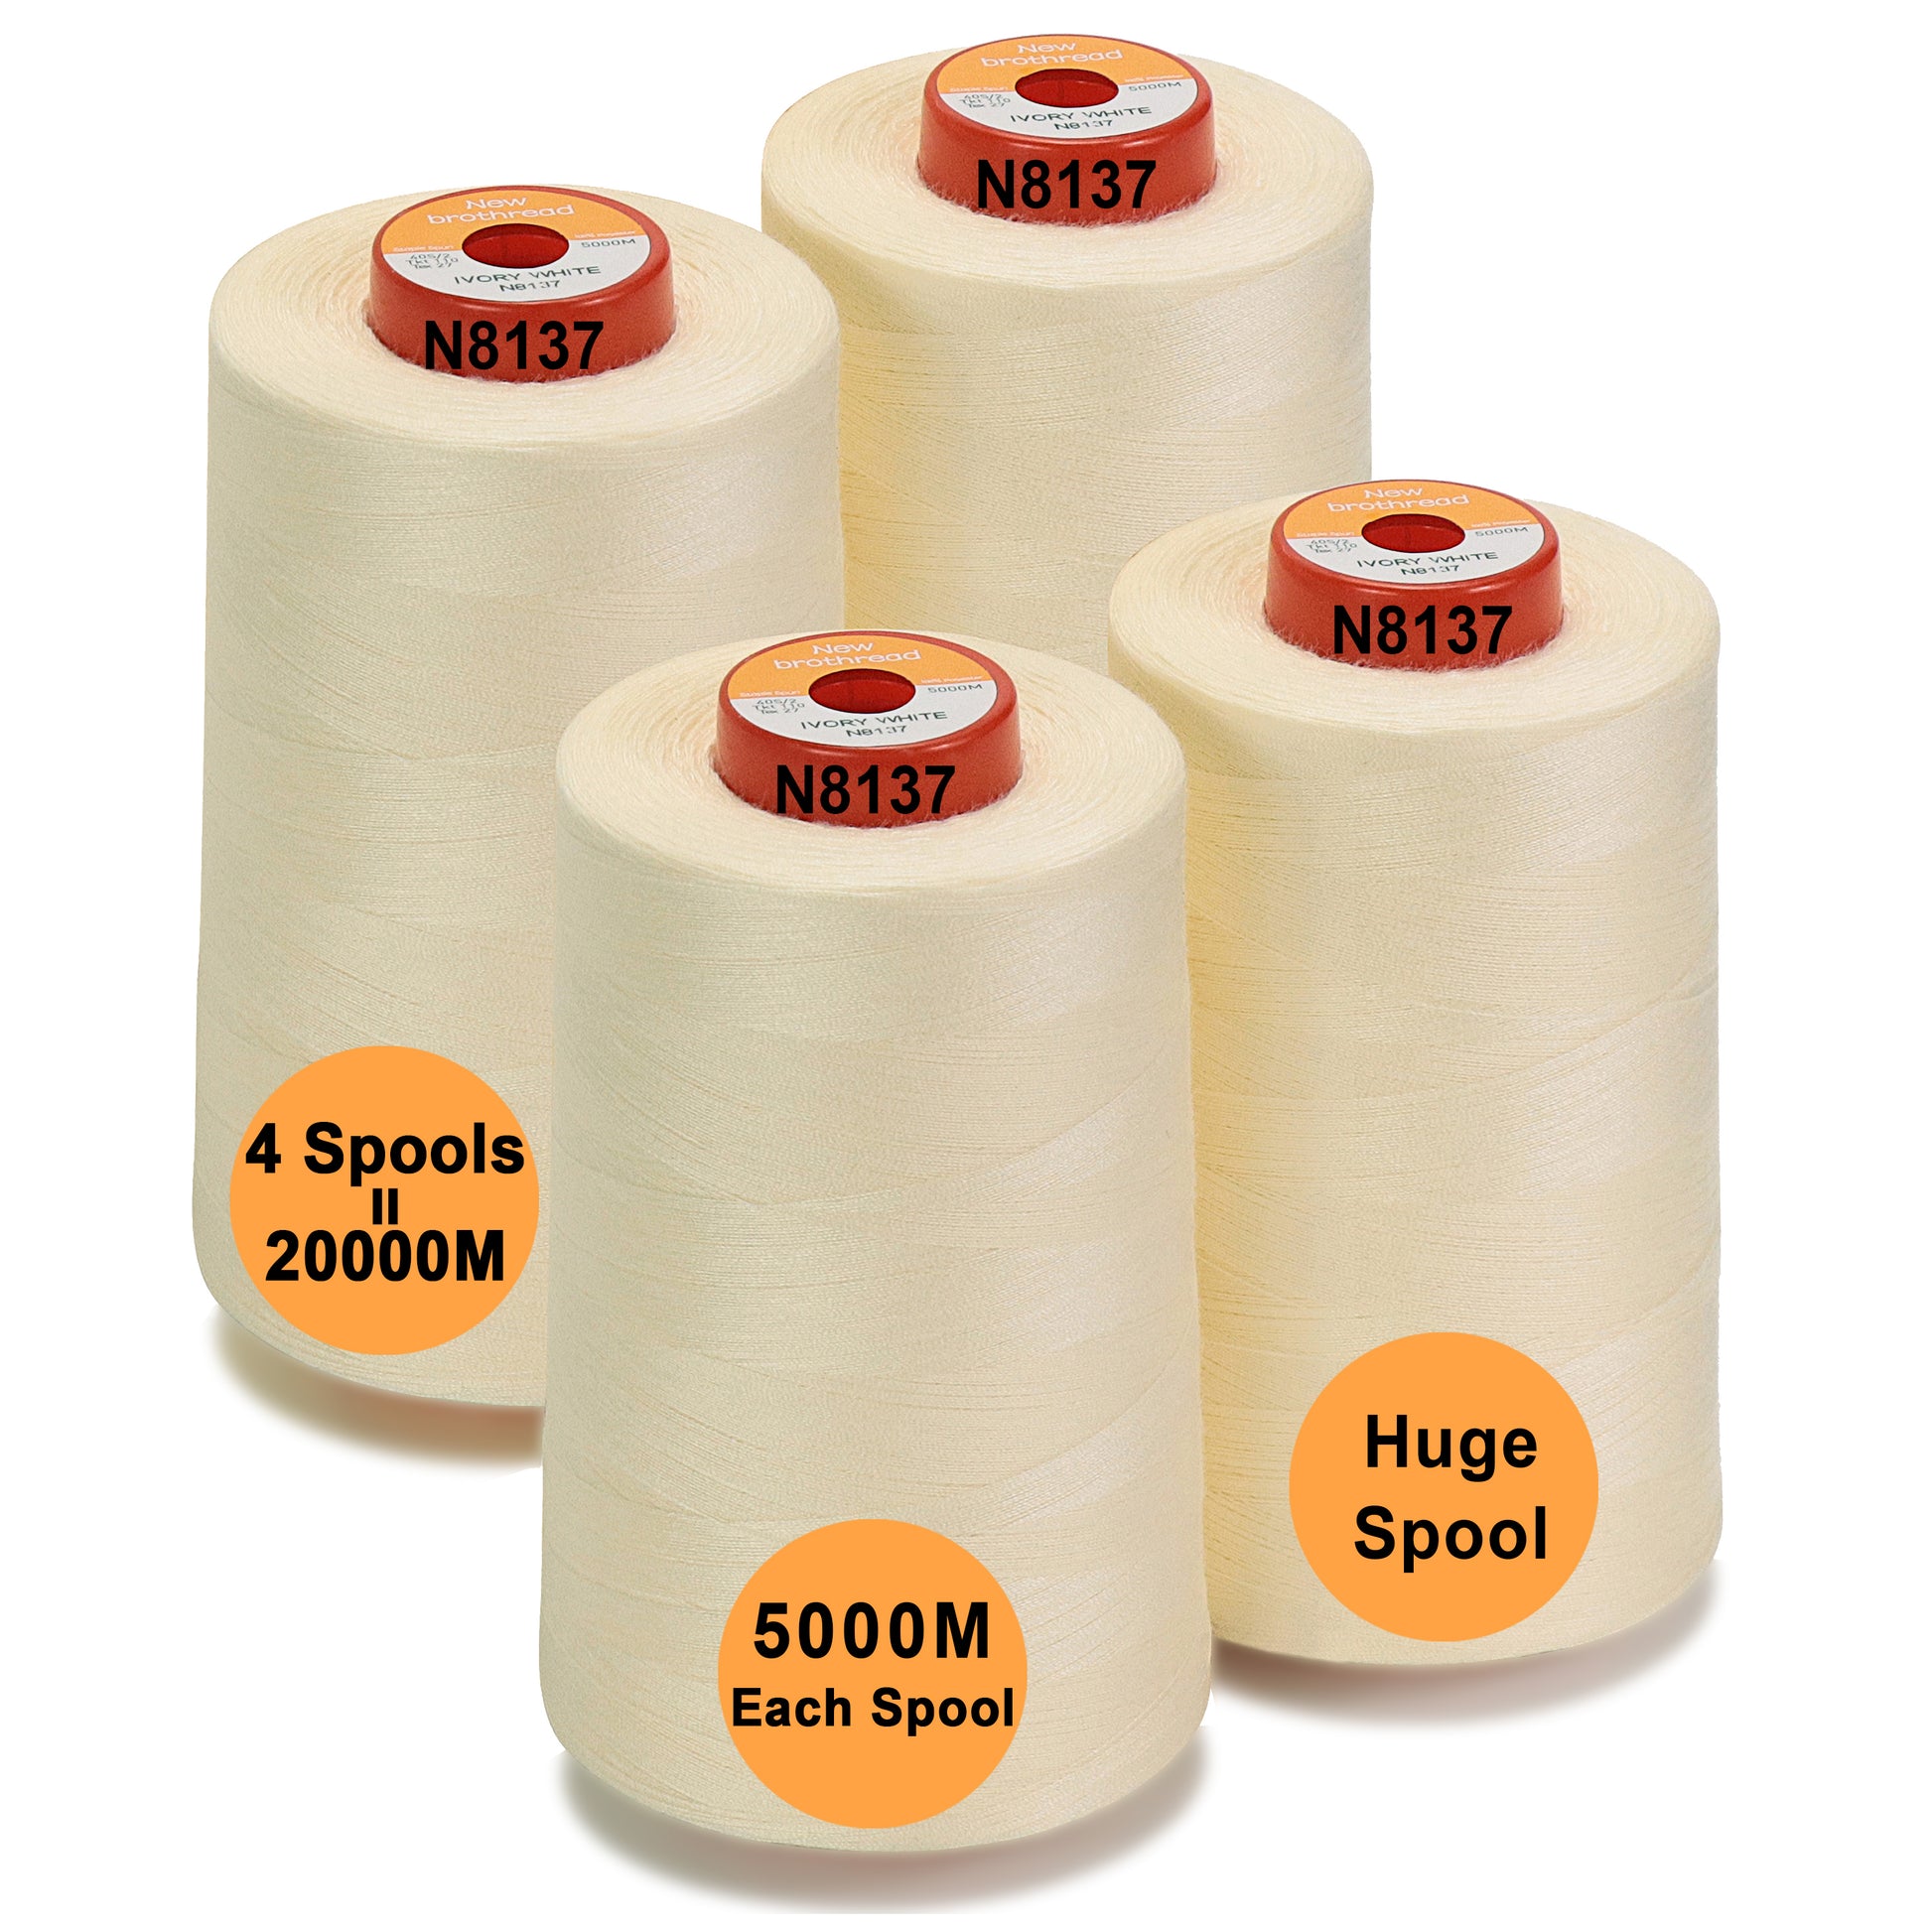 A Large Spool of White Cotton Thick Thread or Rope. Use in Food Production  or Packaging Stock Image - Image of fashion, braid: 239683935